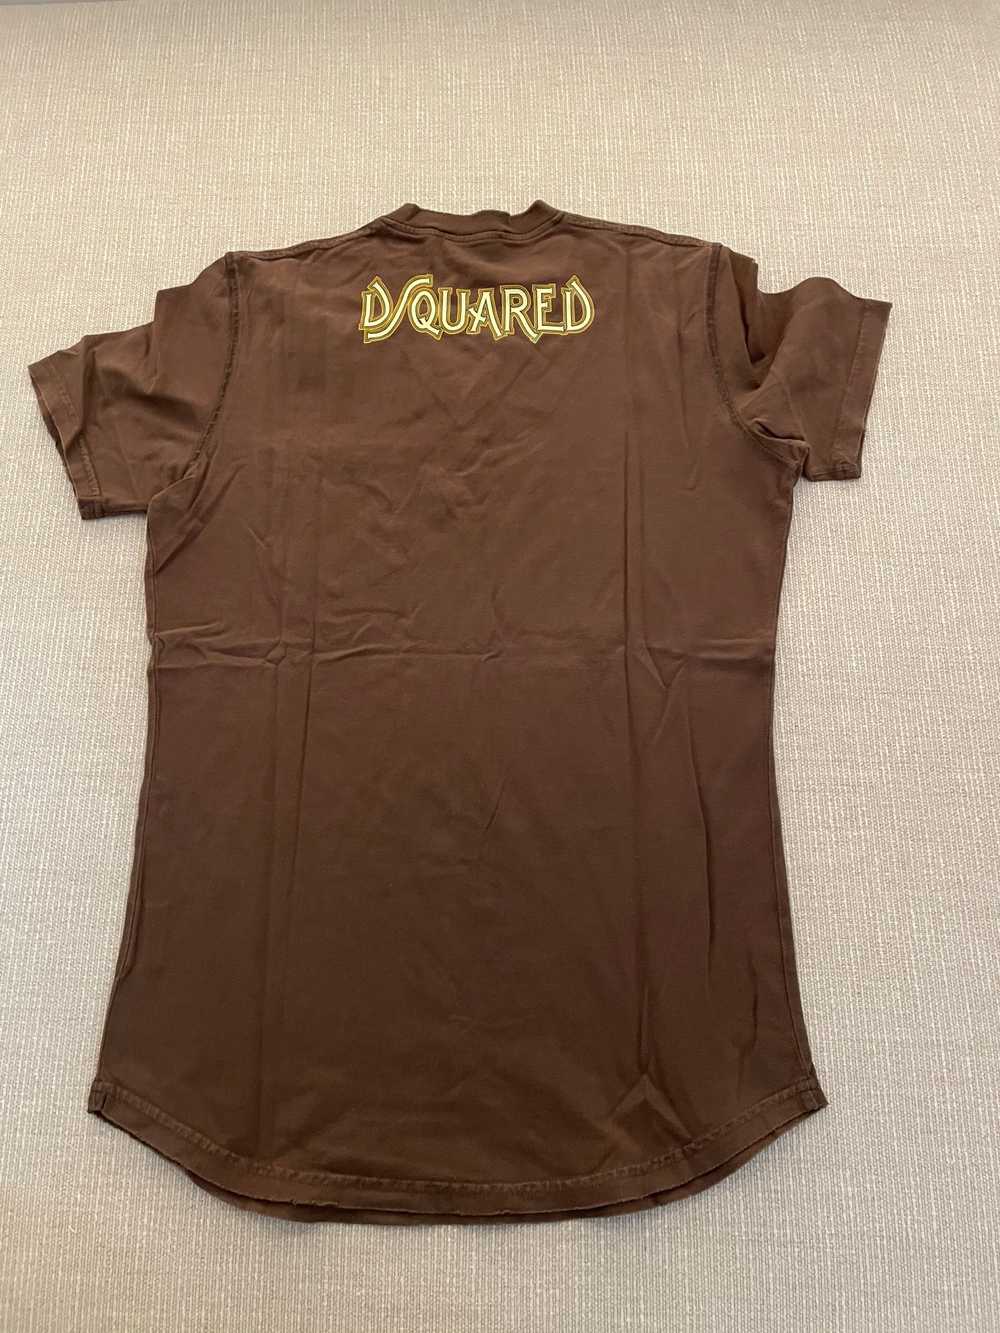 Dsquared2 DSquared brown tshirt - image 1